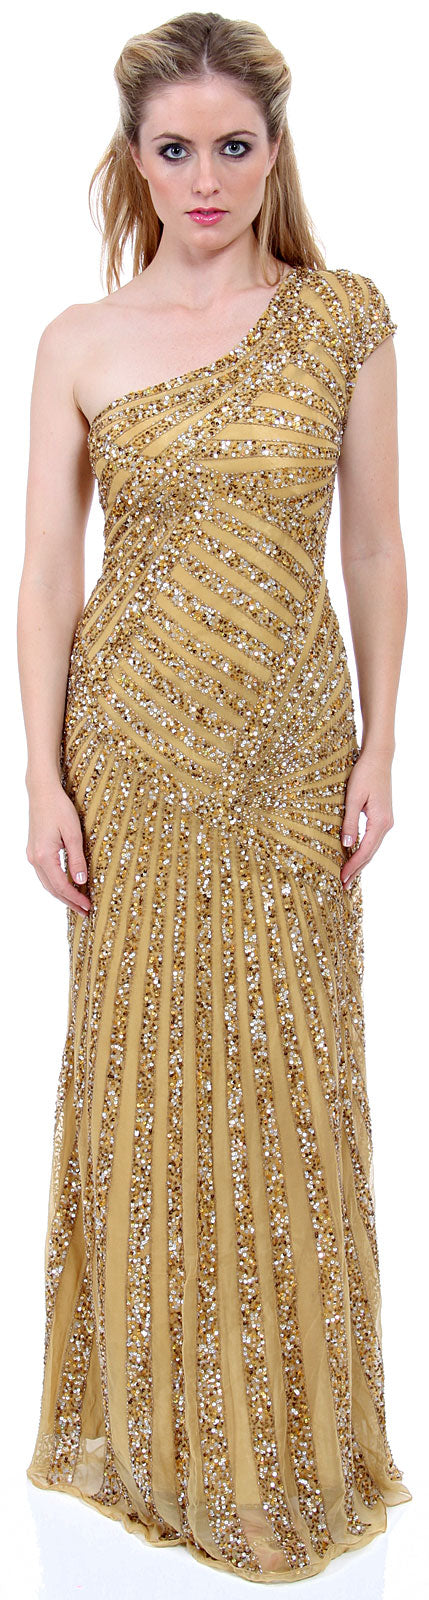 Image of Full Length Sophisticated Sequined Evening Gown in Gold color